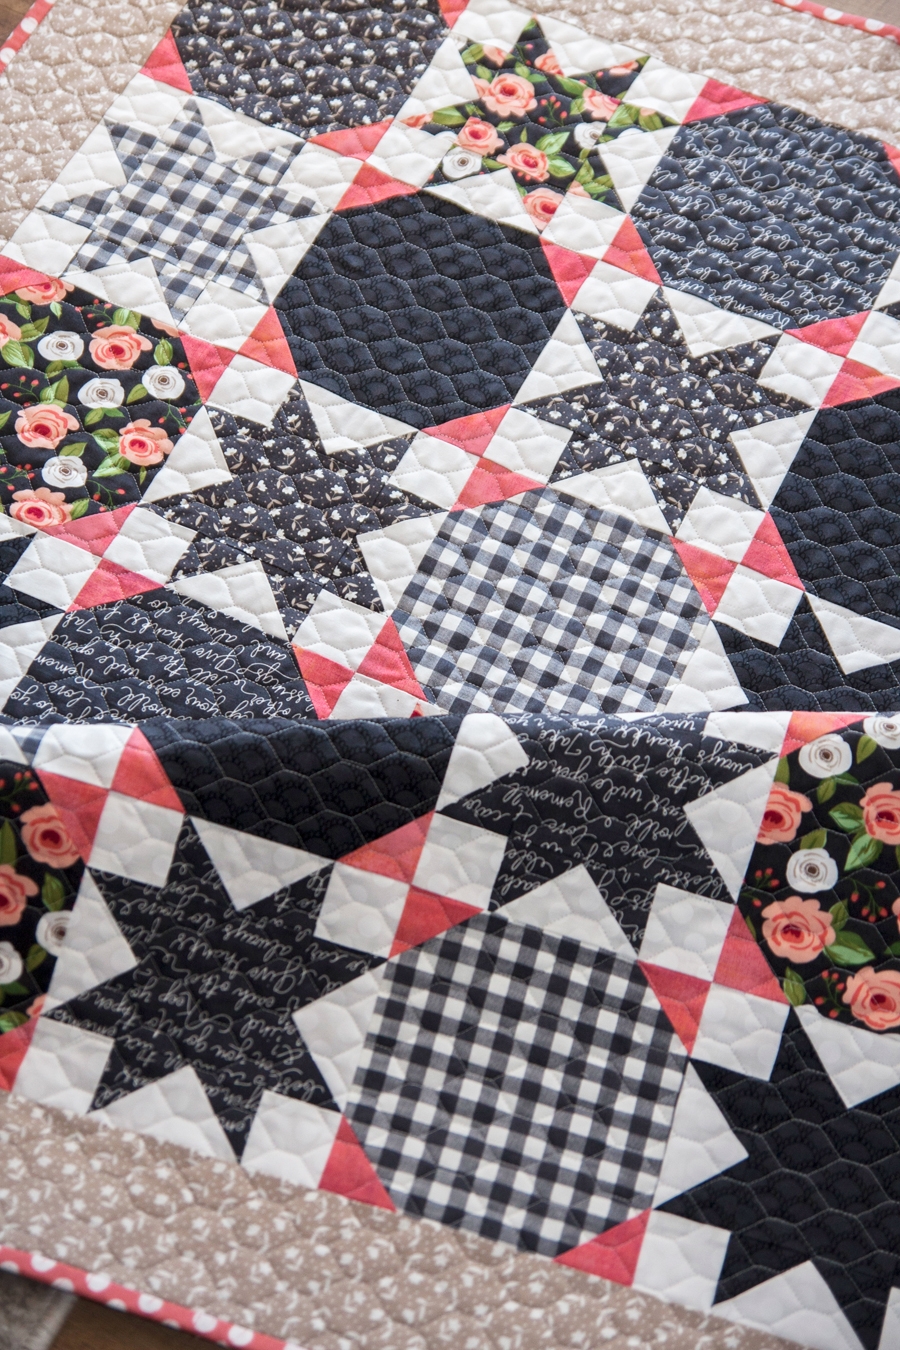 Starstruck Mini quilt or wall hanging. Fabric is Farmer's Daughter by Lella Boutique for Moda Fabrics